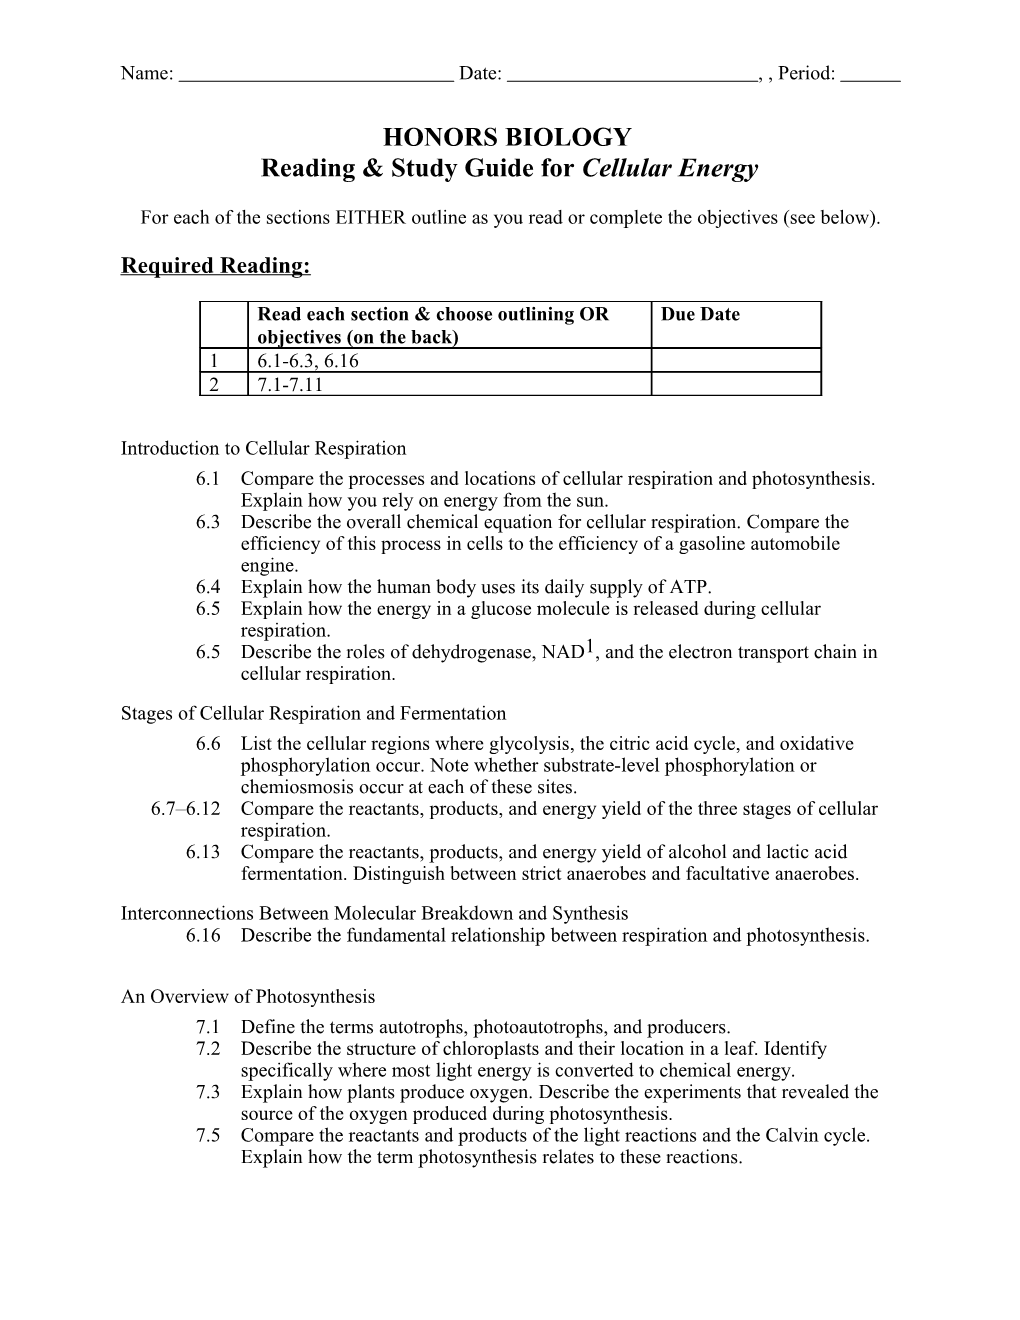 Reading & Study Guide for Cellular Energy